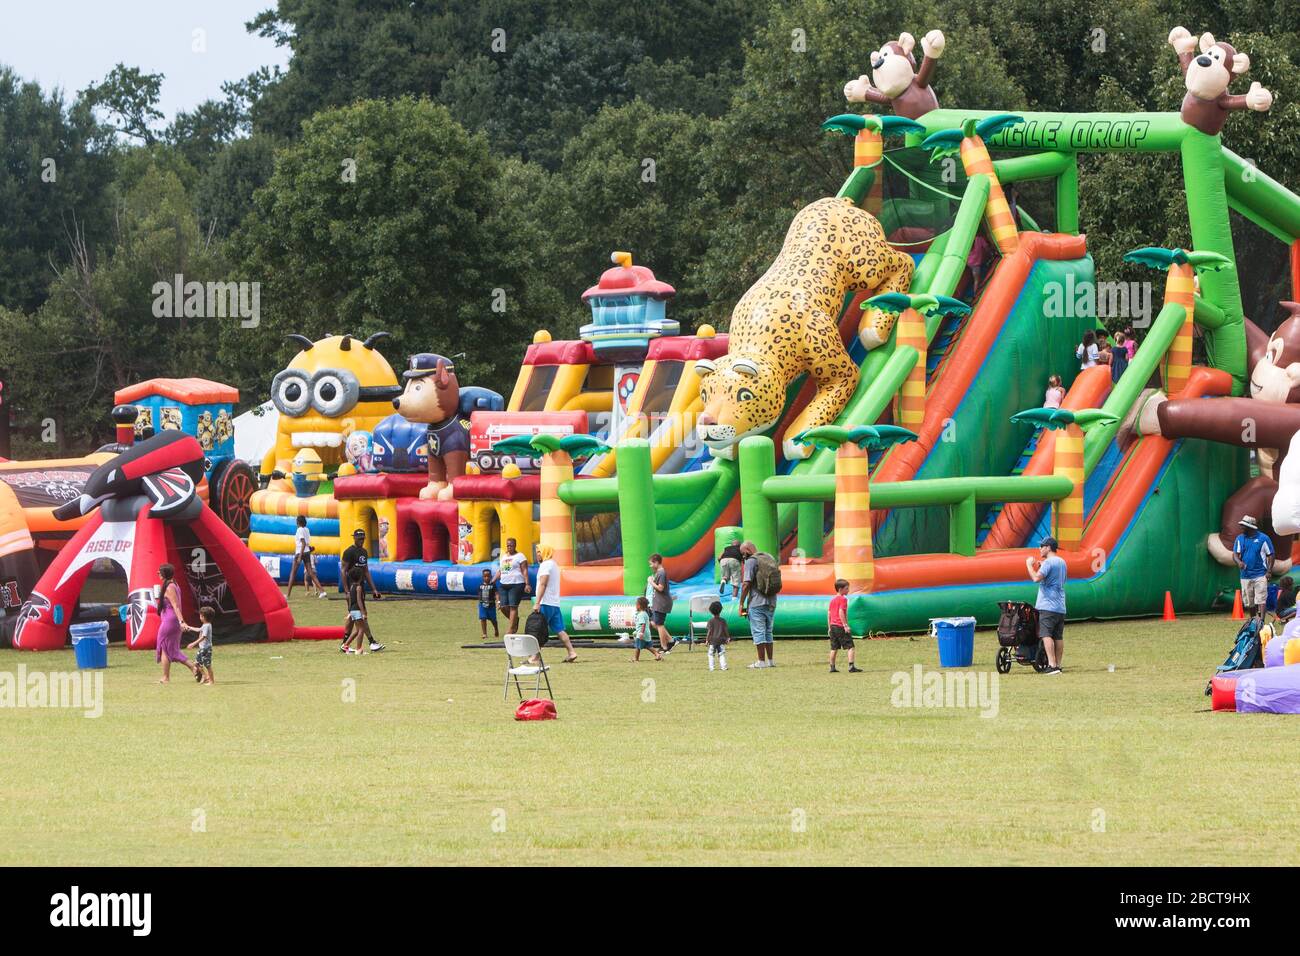 Giant Inflatables High Resolution Stock Photography And Images Alamy